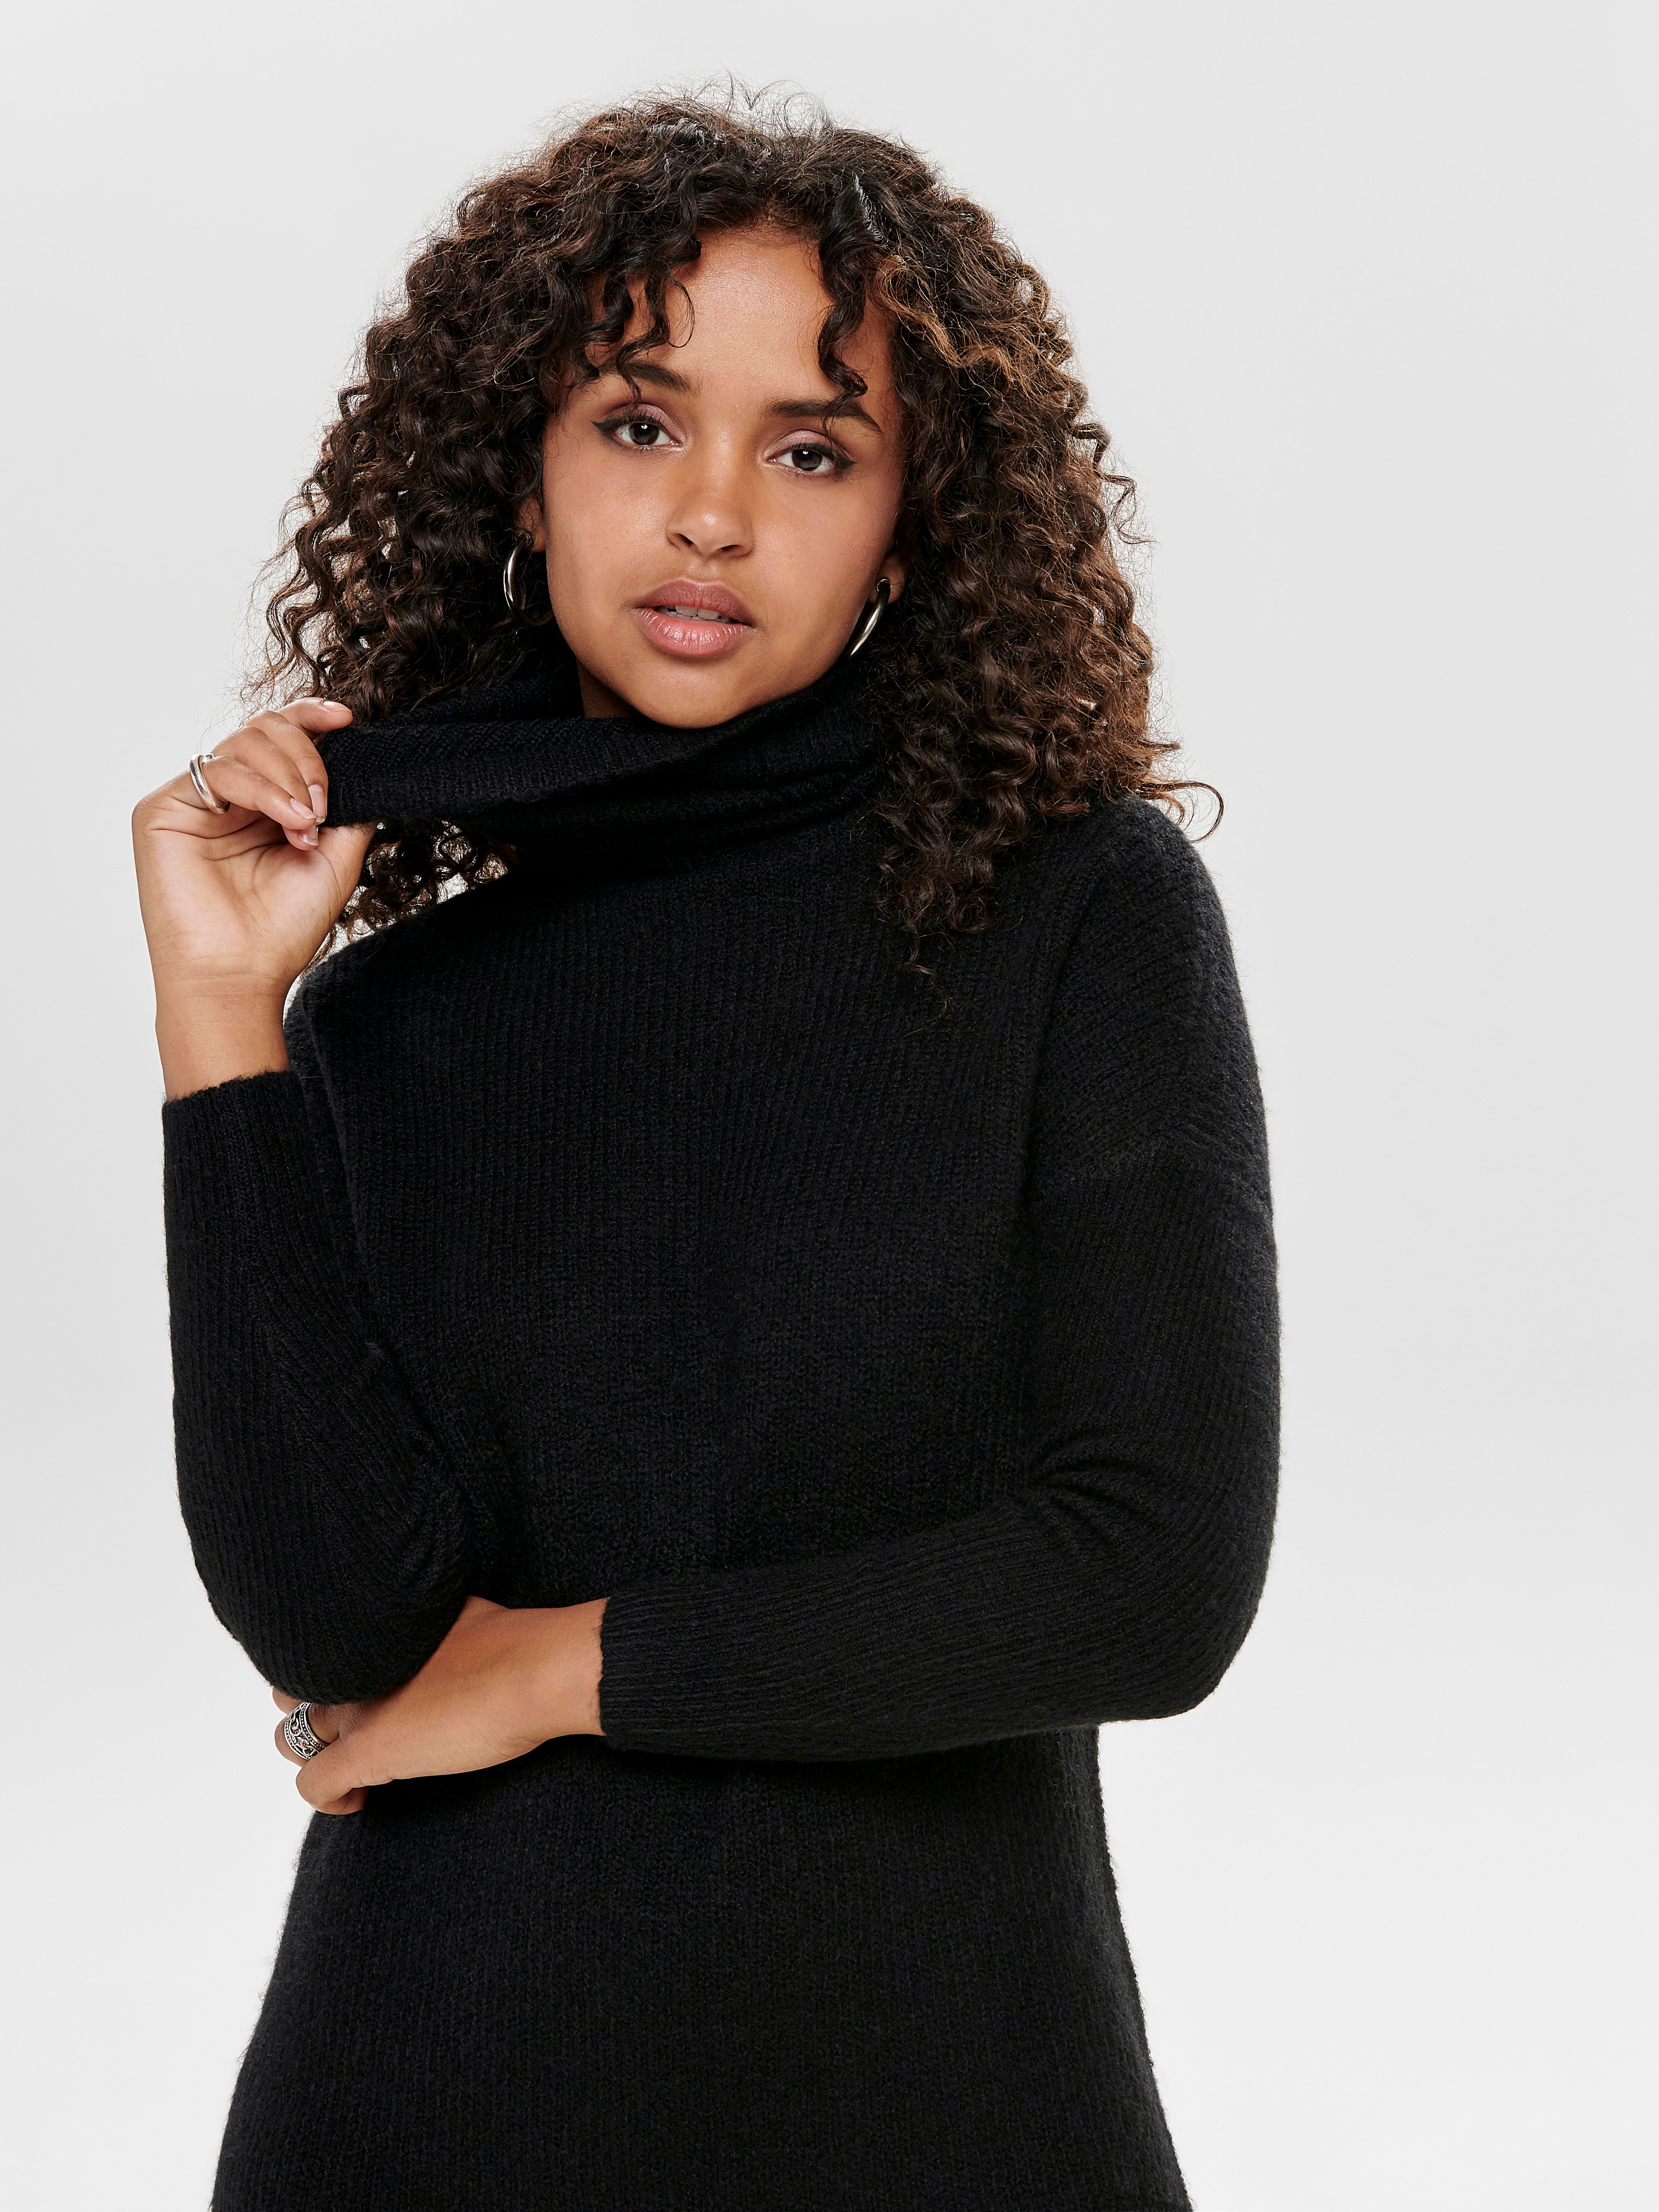 Long sleeved Knitted | ONLY® Black Dress 